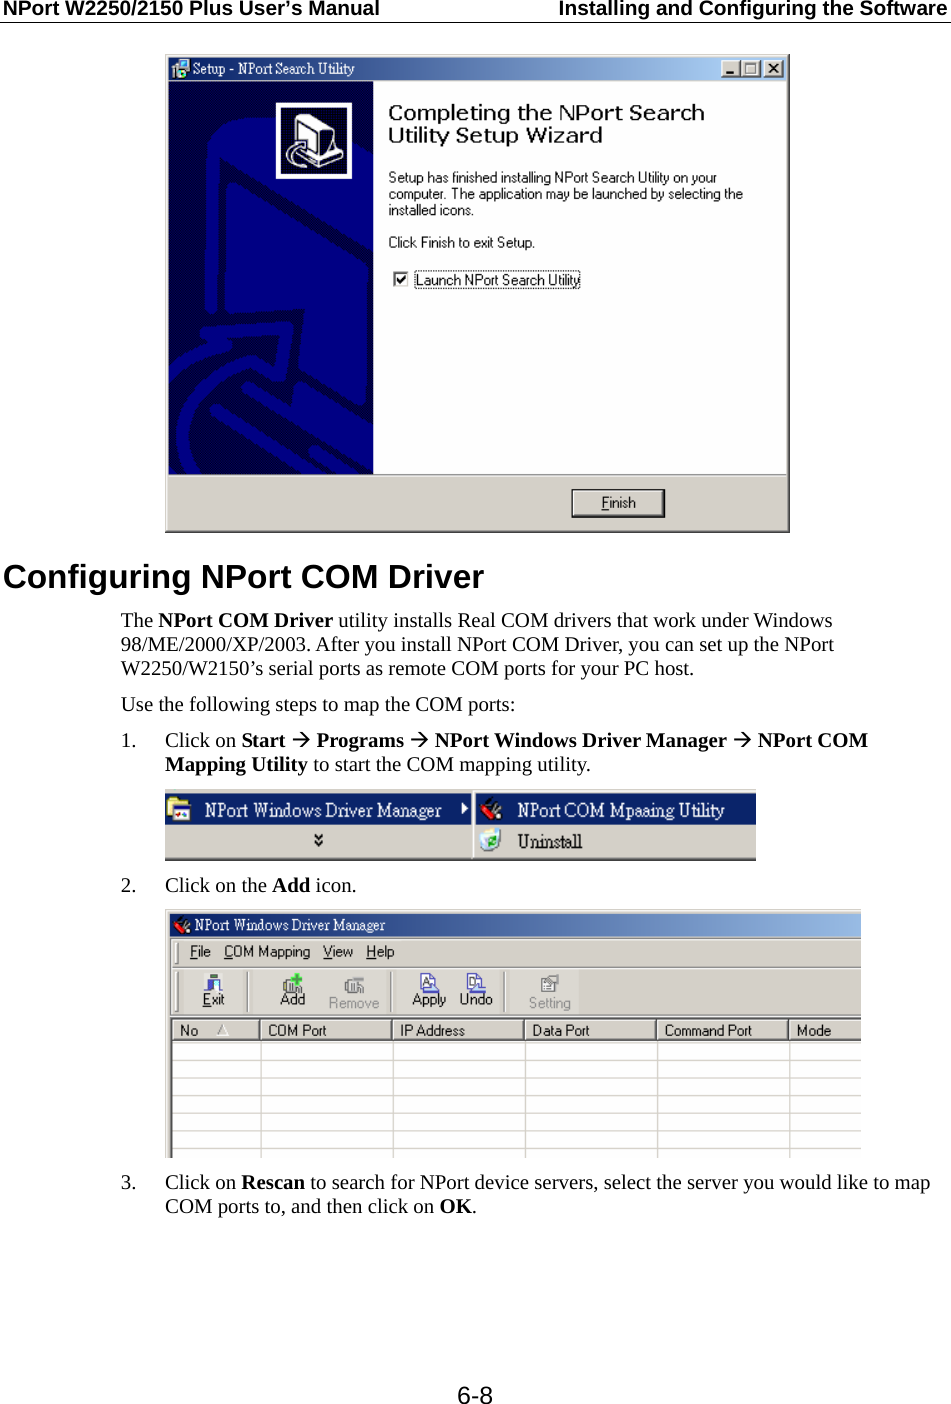 NPort W2250/2150 Plus User’s Manual  Installing and Configuring the Software  6-8 Configuring NPort COM Driver The NPort COM Driver utility installs Real COM drivers that work under Windows 98/ME/2000/XP/2003. After you install NPort COM Driver, you can set up the NPort W2250/W2150’s serial ports as remote COM ports for your PC host. Use the following steps to map the COM ports: 1. Click on Start Æ Programs Æ NPort Windows Driver Manager Æ NPort COM Mapping Utility to start the COM mapping utility.  2. Click on the Add icon.  3. Click on Rescan to search for NPort device servers, select the server you would like to map COM ports to, and then click on OK. 